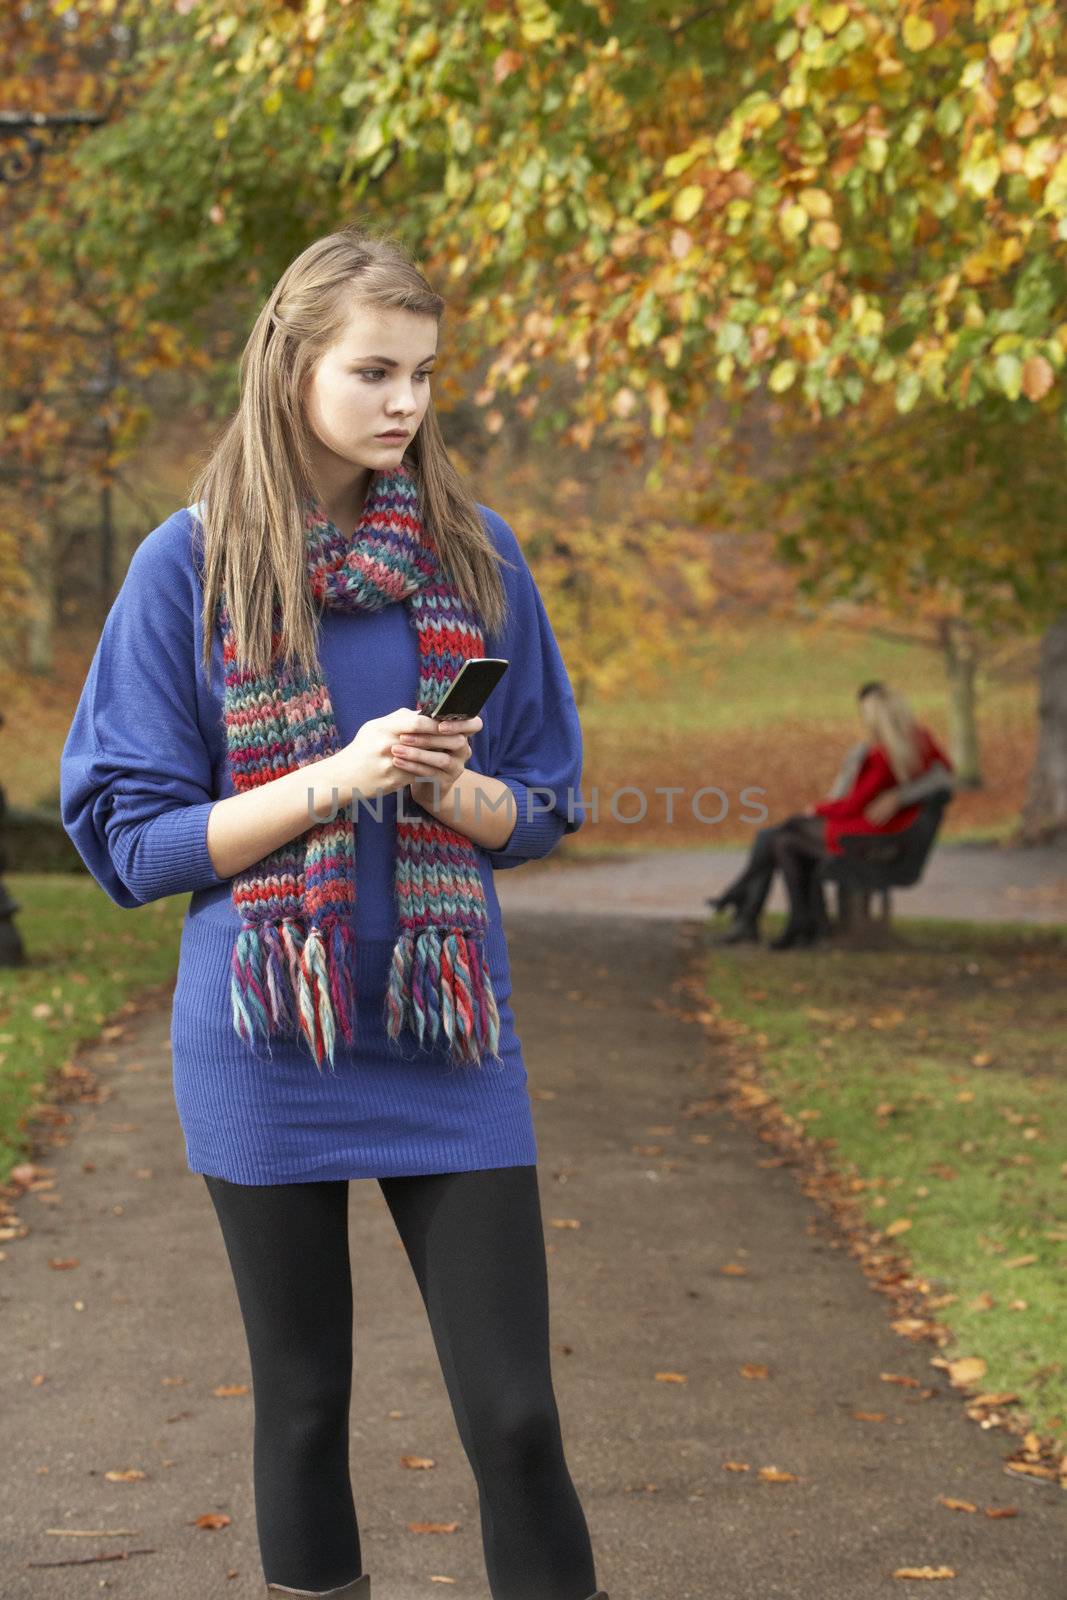 Unhappy Teenage Girl Standing In Autumn Park With Couple On Benc by omg_images